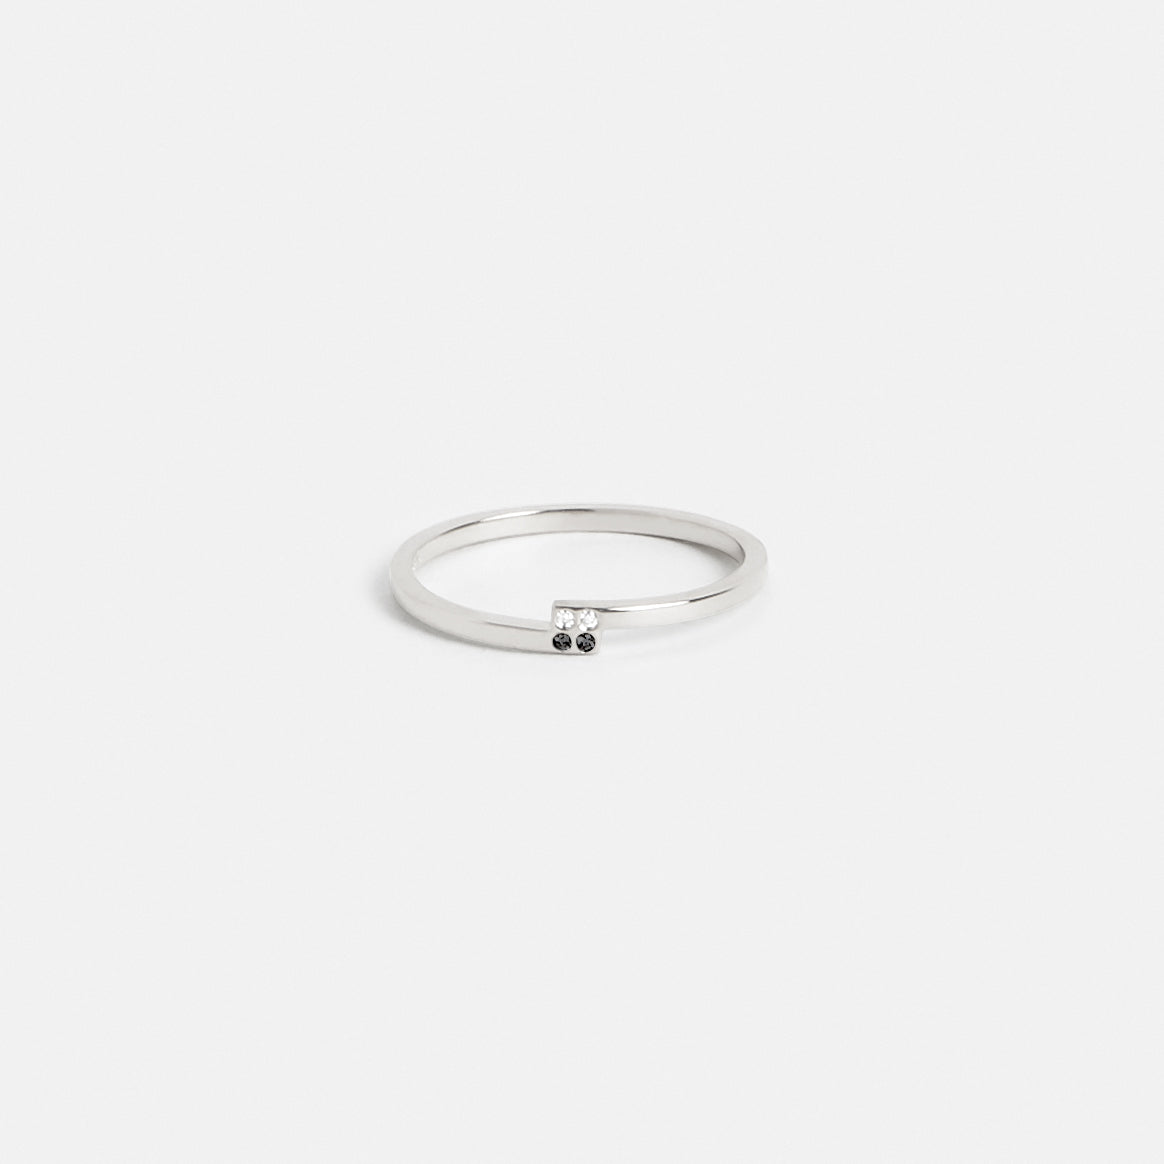 Piva Unique Ring in Sterling Silver set with White and Black Diamonds By SHW Fine Jewelry NYC